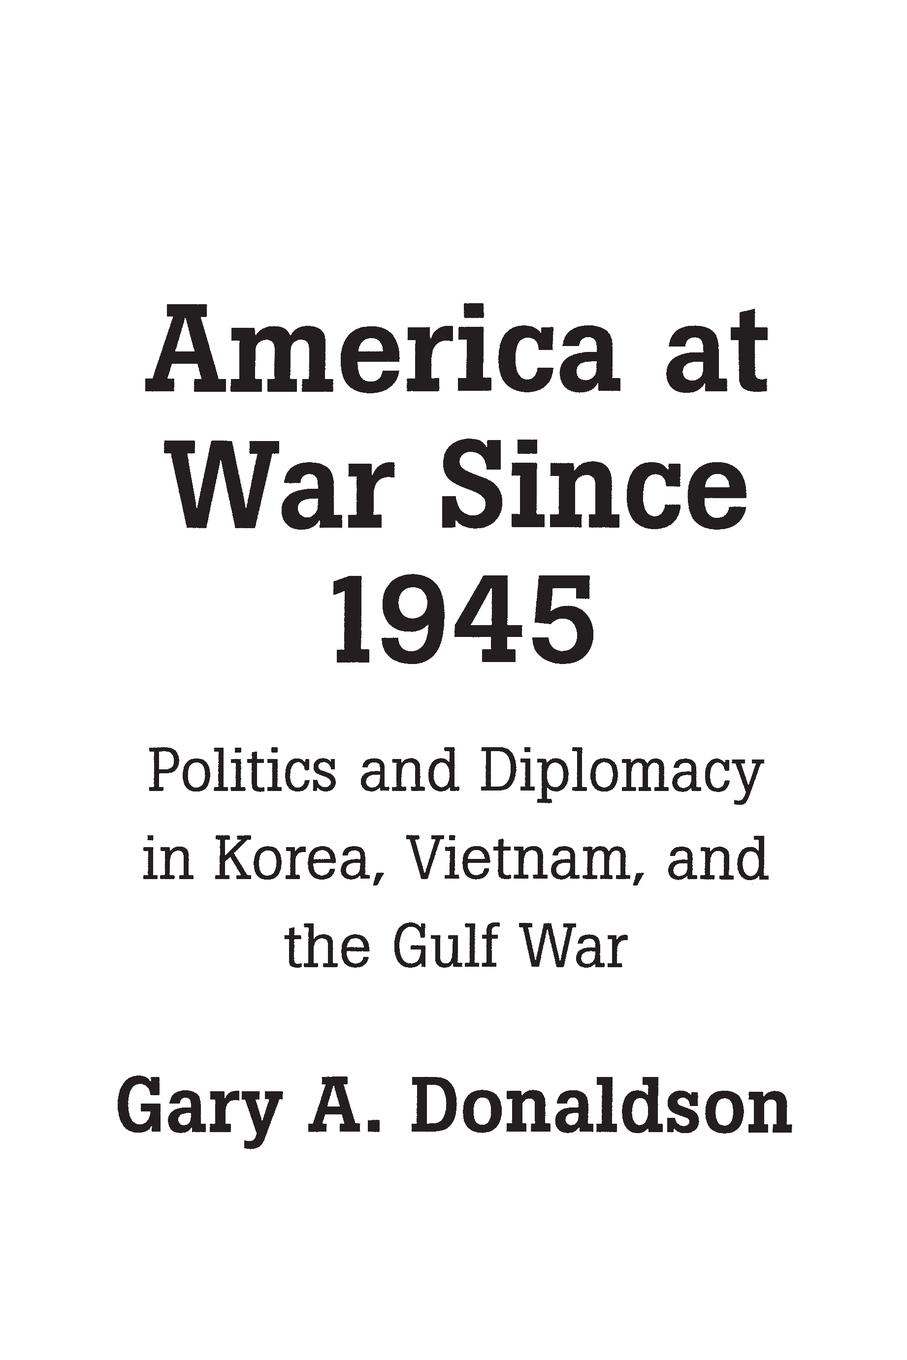 America at War Since 1945. Politics and Diplomacy in Korea, Vietnam, and the Gulf War